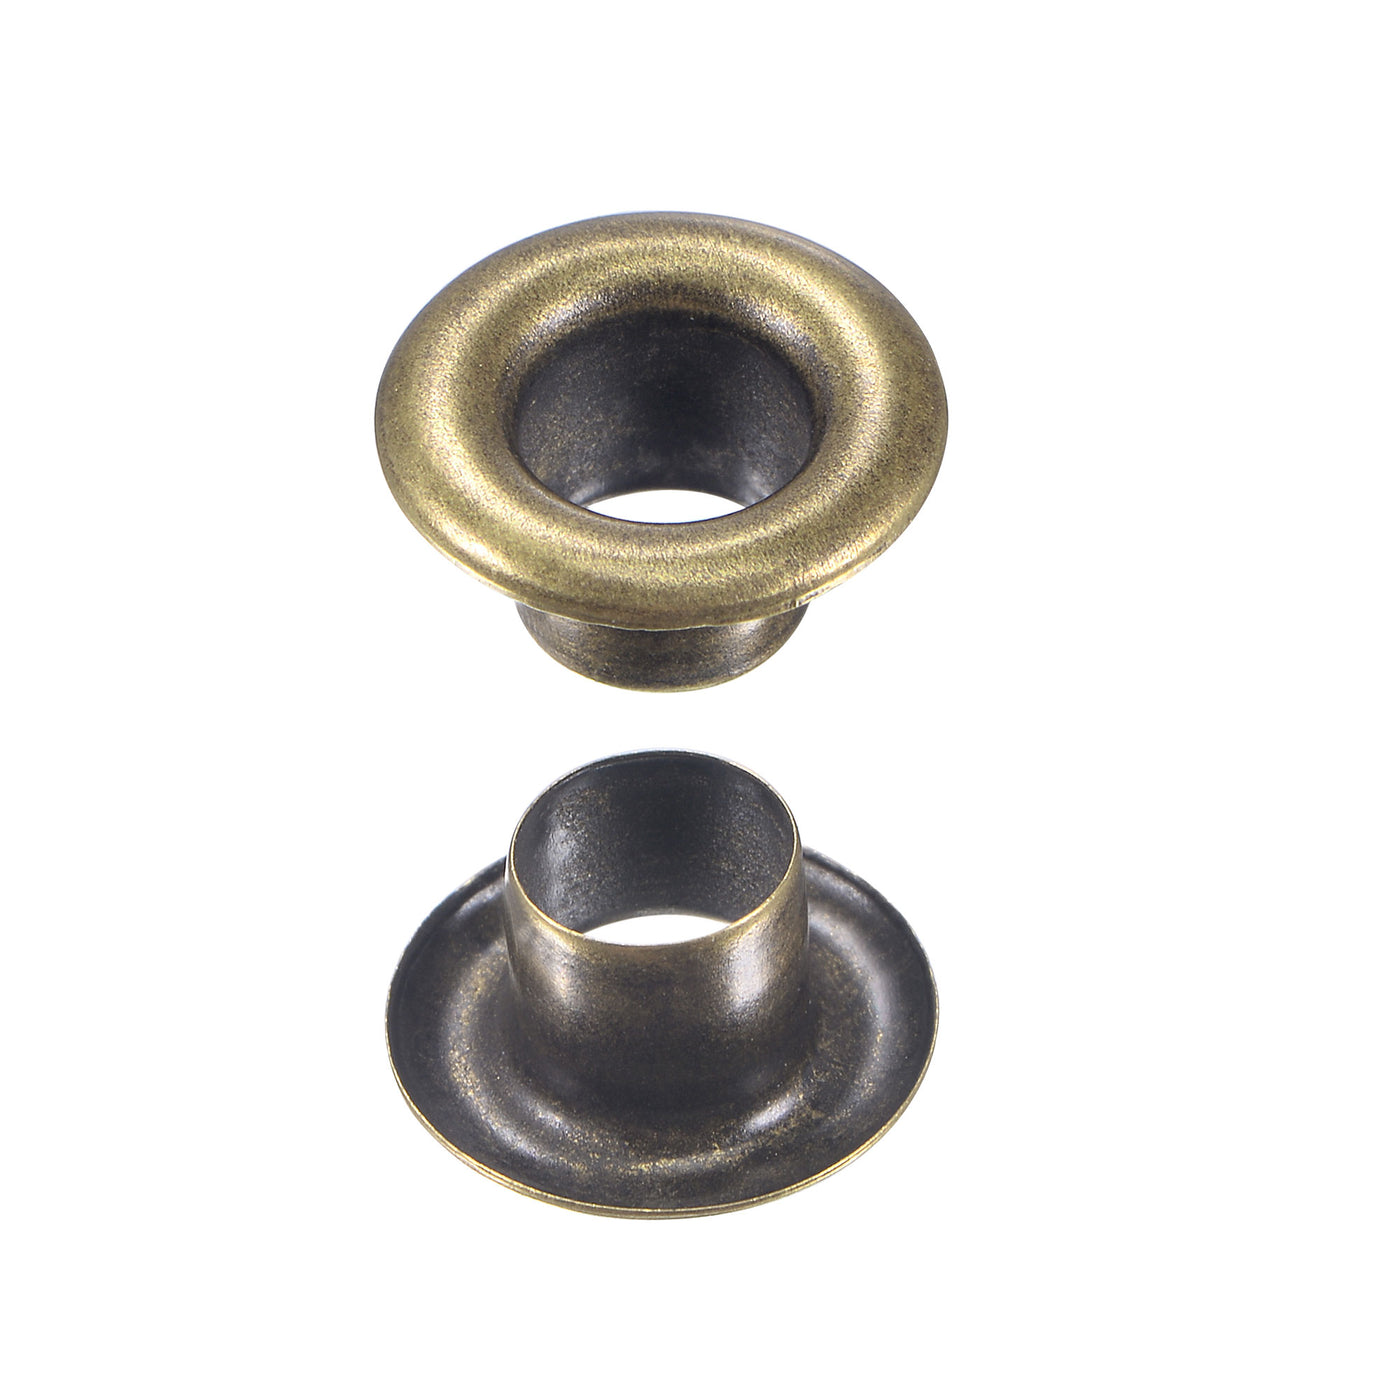 uxcell Uxcell Eyelet with Washer 9.5x5x4.5mm Copper Grommet Chrome Plated Bronze Tone 100 Set